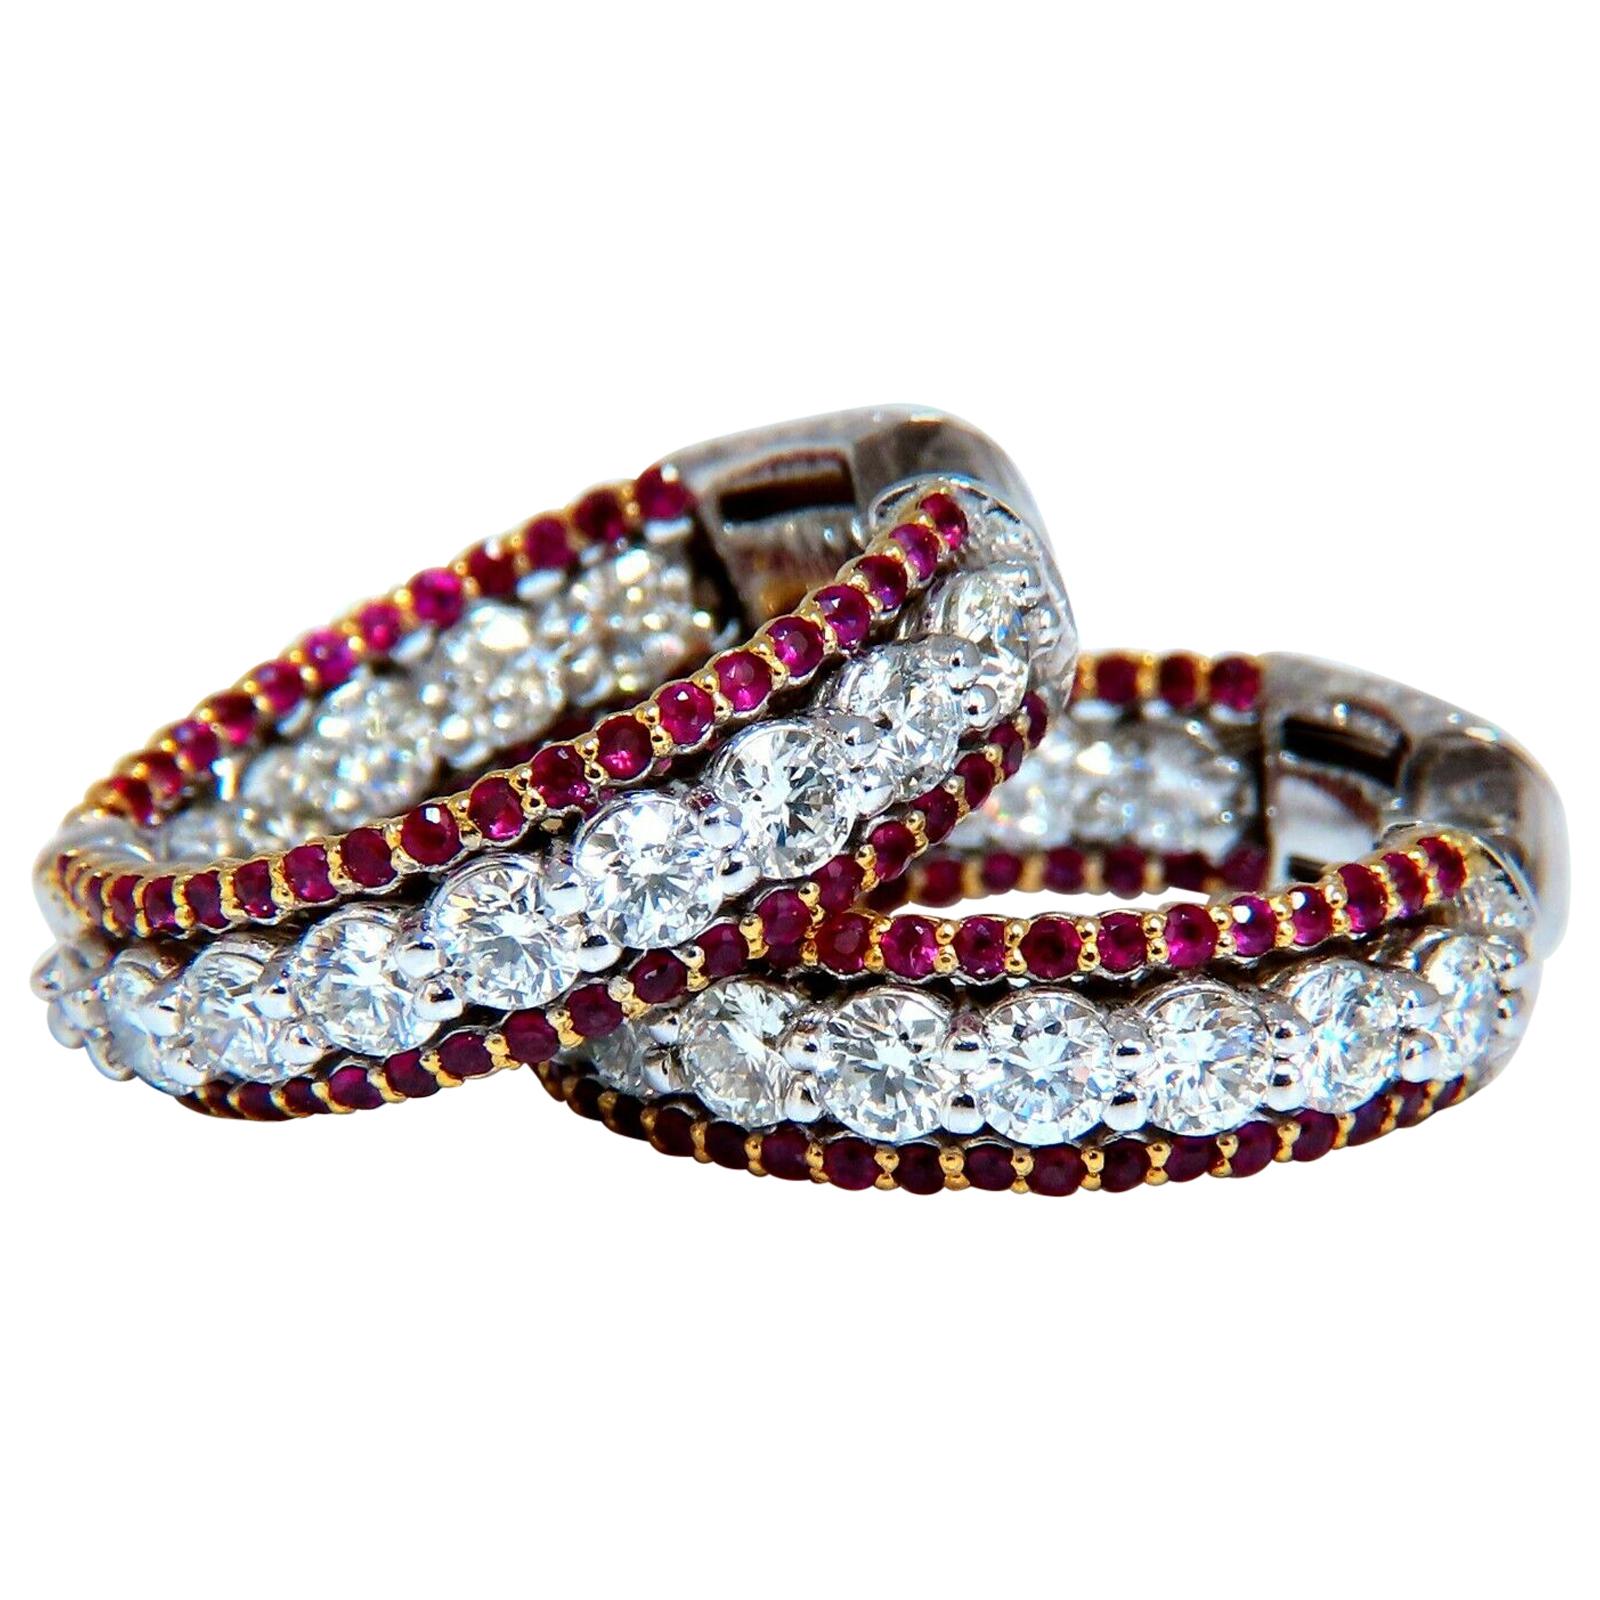 4.24 Carat Natural Red Ruby Diamond Hoop Earrings 14kt Gold Three-Row Intricate For Sale